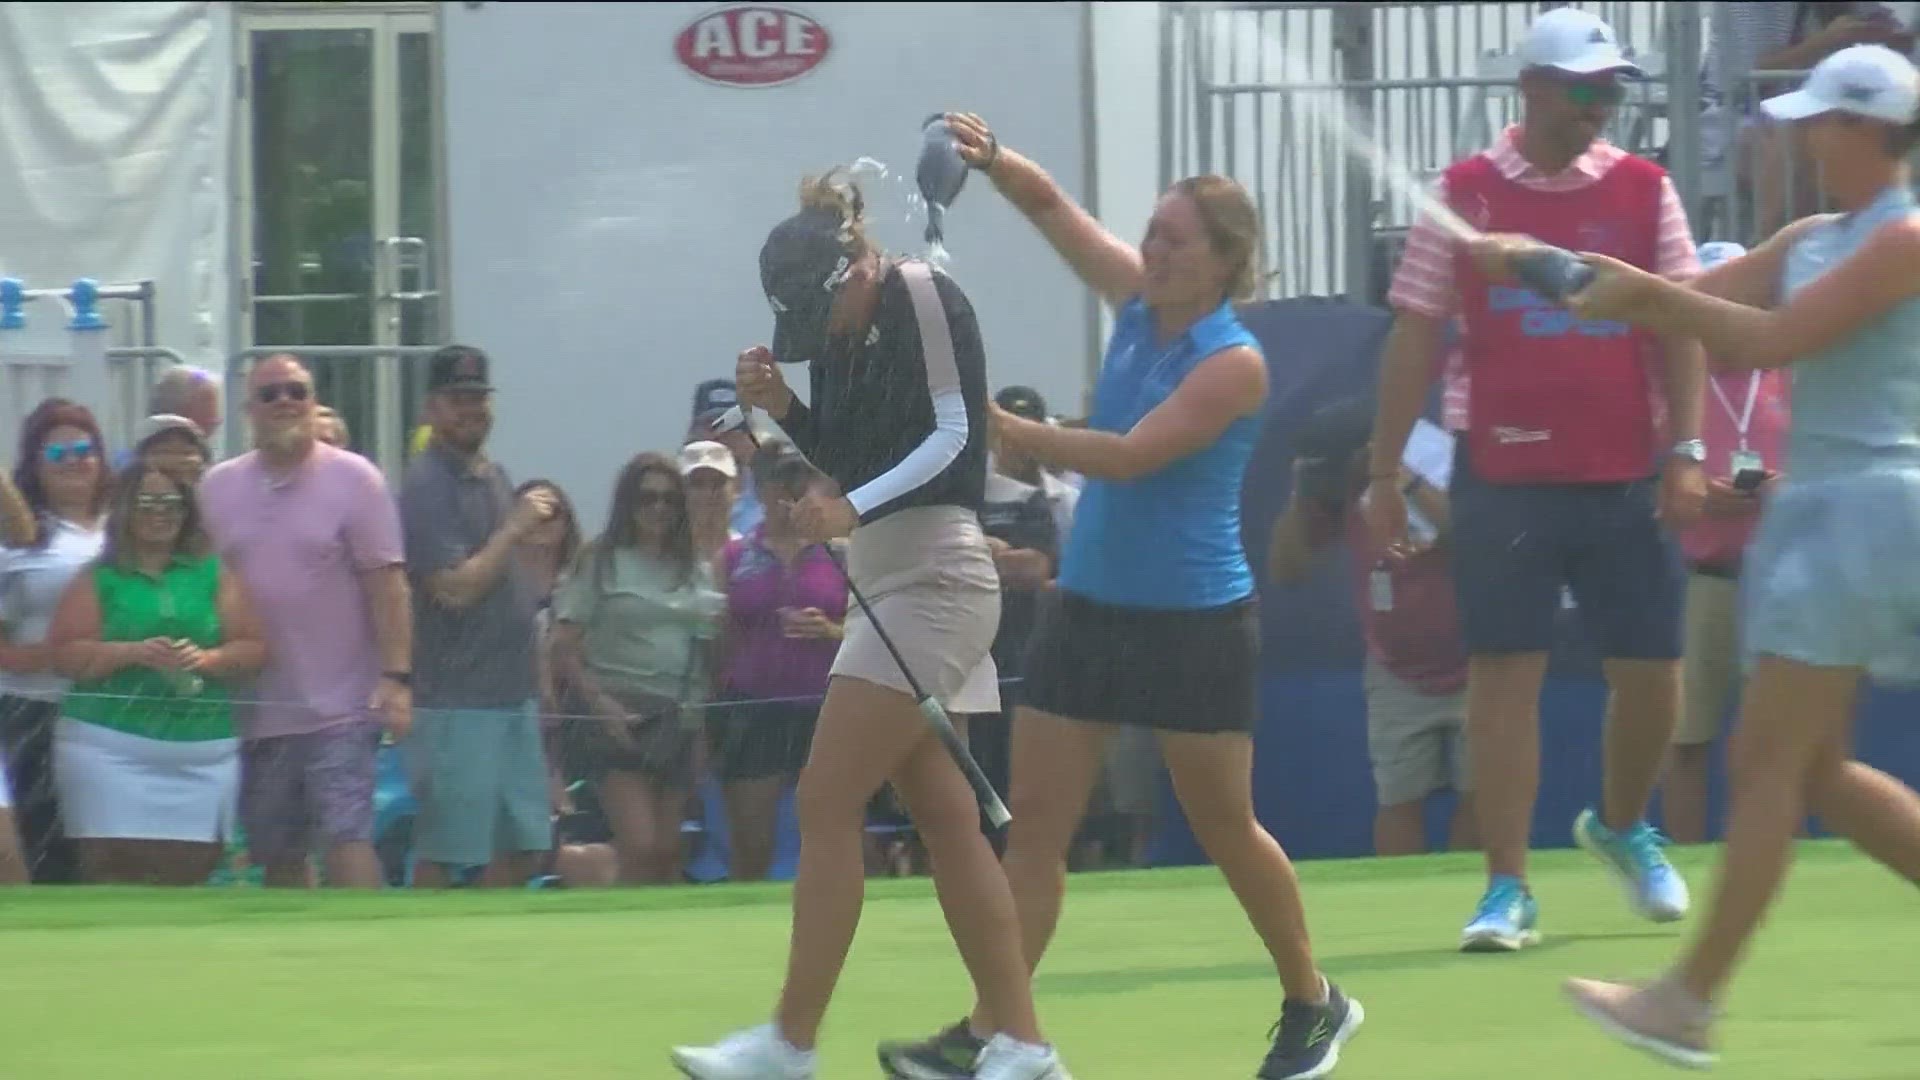 Grant finished the tournament at -21 to win her Dana Open debut and collect her first ever LPGA Tour win.